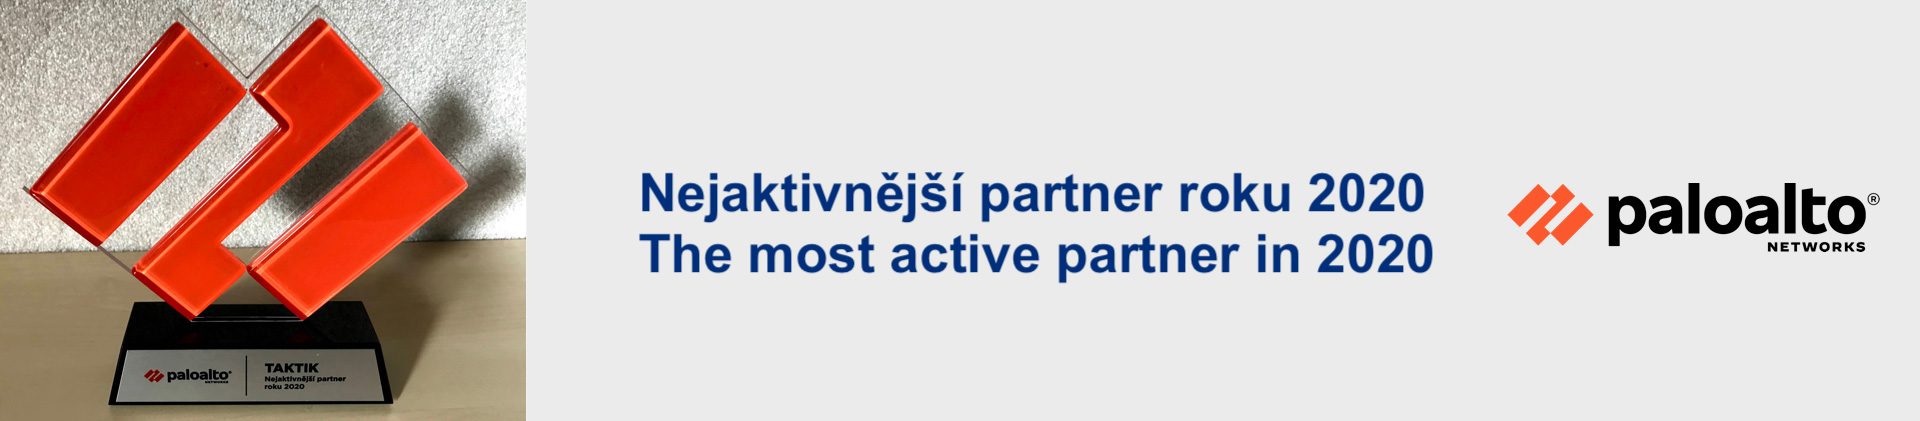 TAKTIK is the most active partner of Palo Alto Networks in 2020!